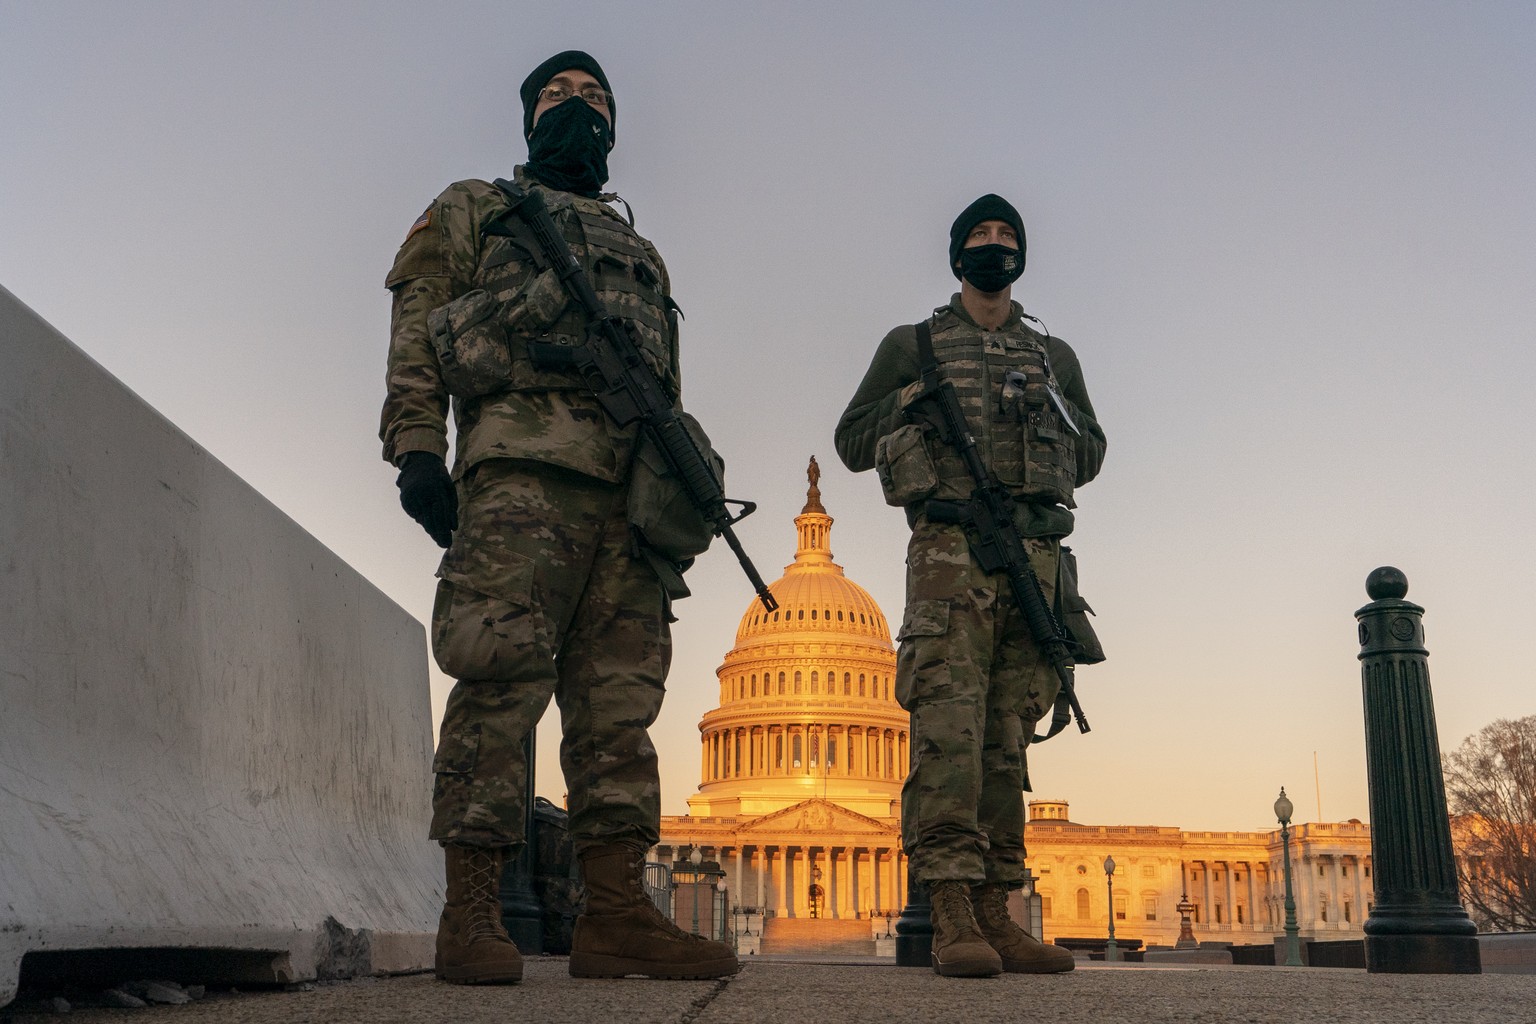 National Guard stand their posts around the Capitol at sunrise in Washington, Monday, March 8, 2021. (AP Photo/Carolyn Kaster)